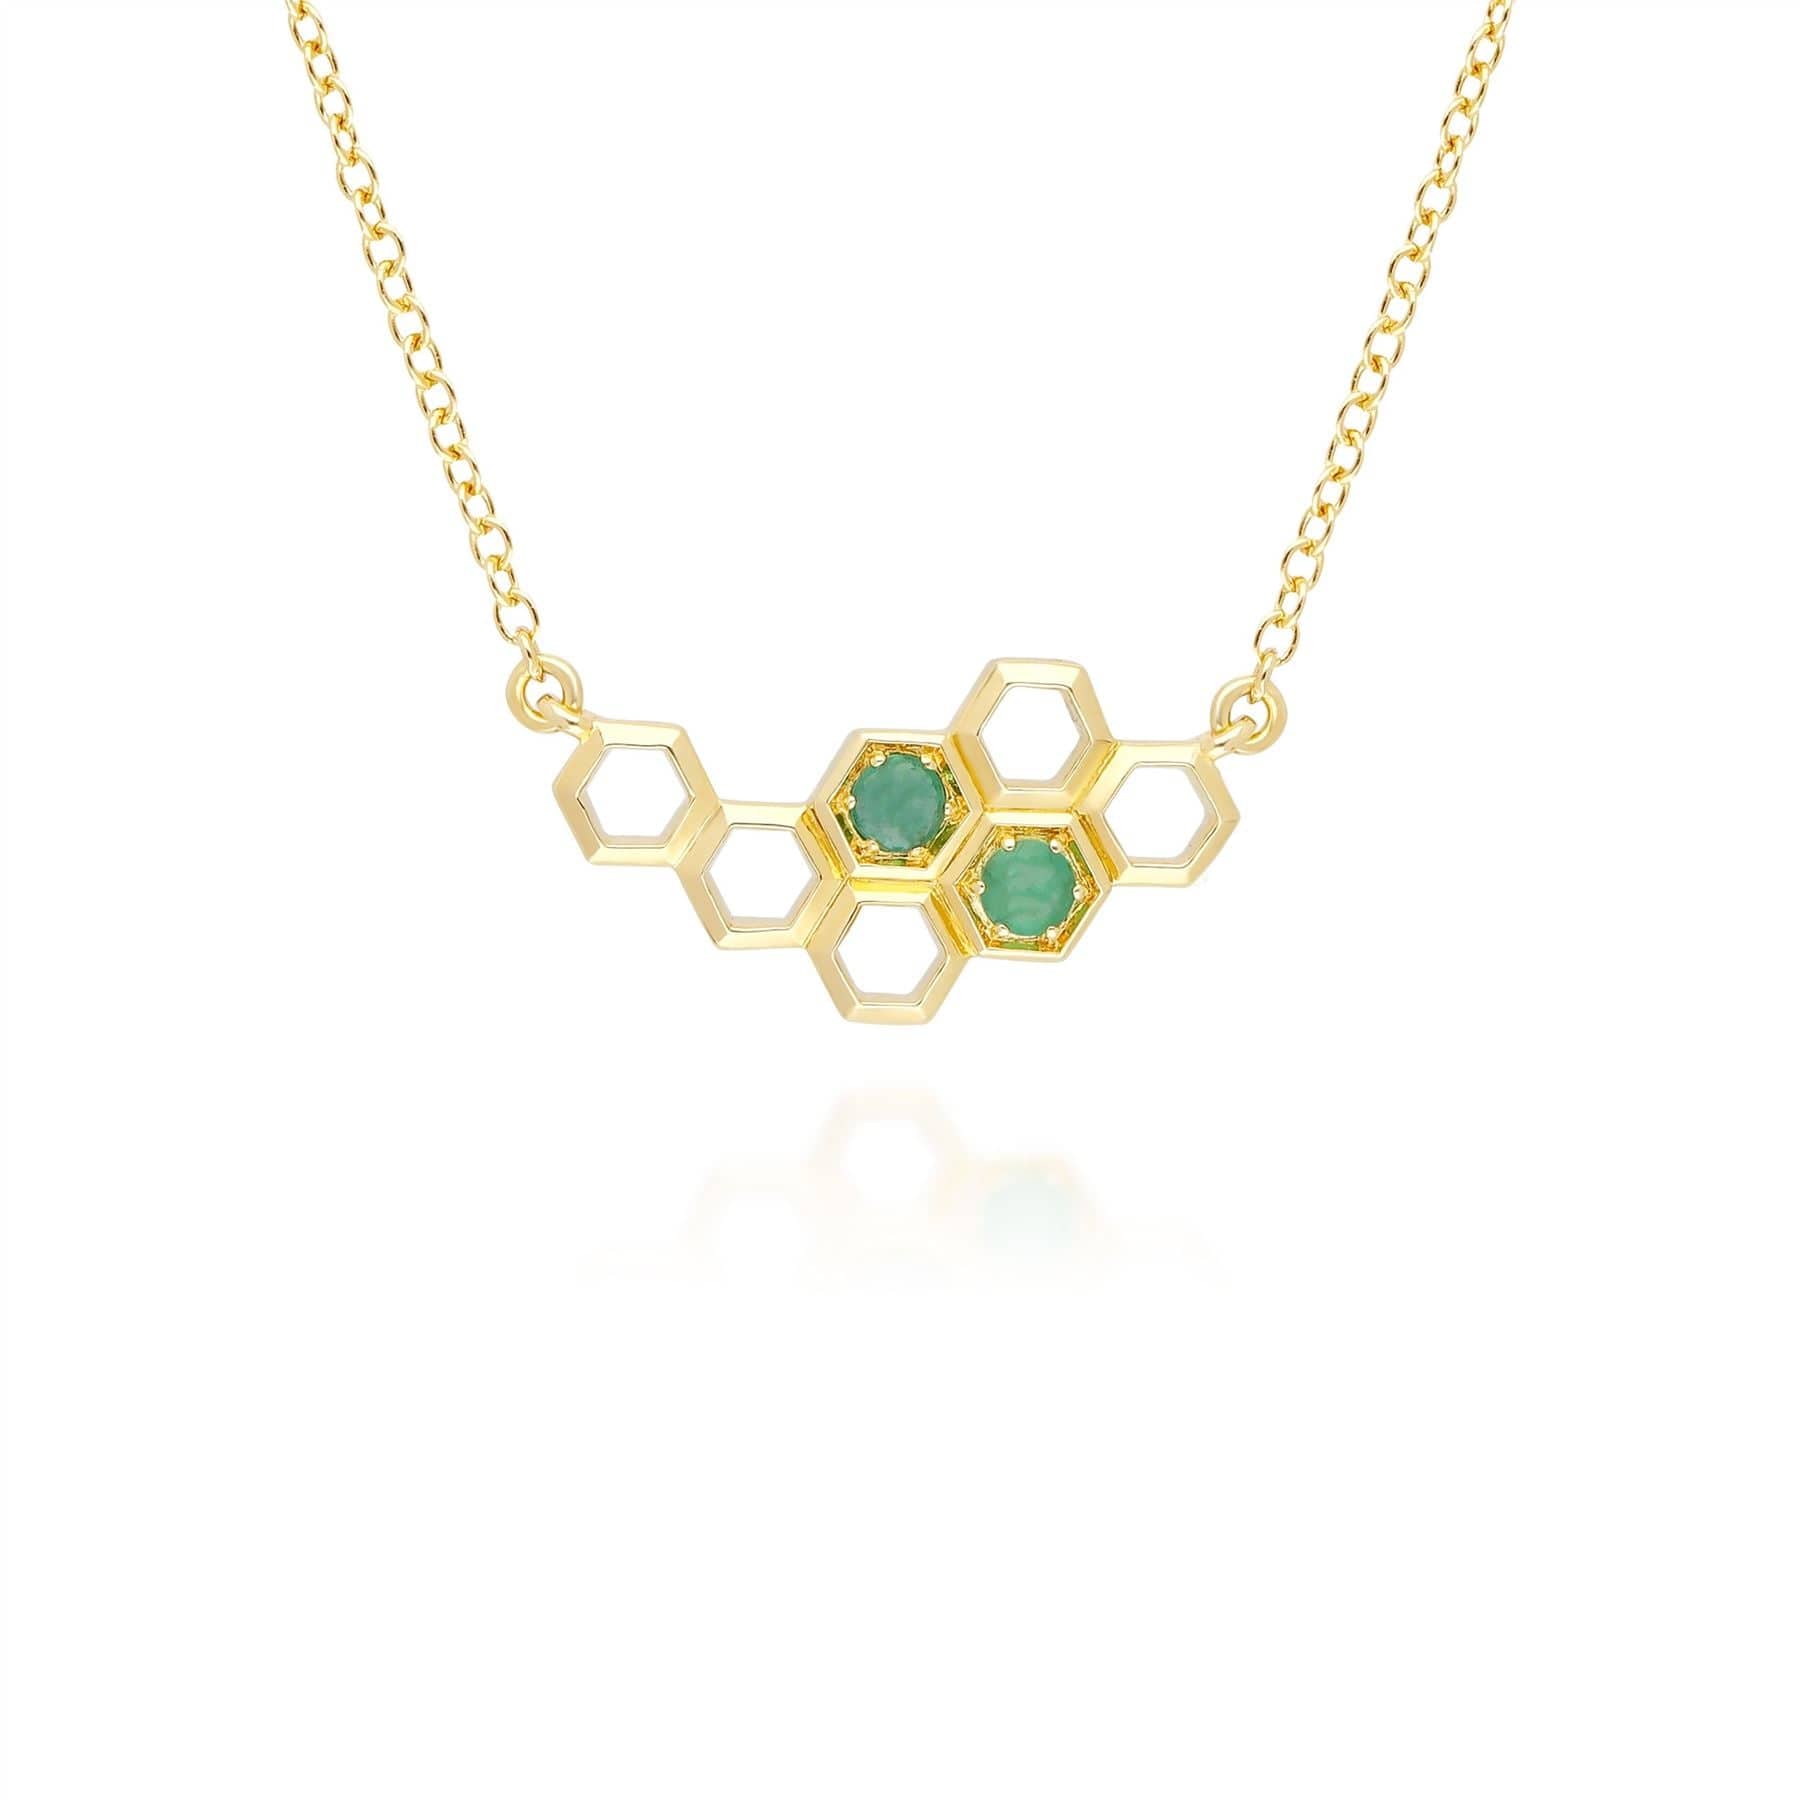 Image of Honeycomb Inspired Emerald Link Necklace in 9ct Yellow Gold